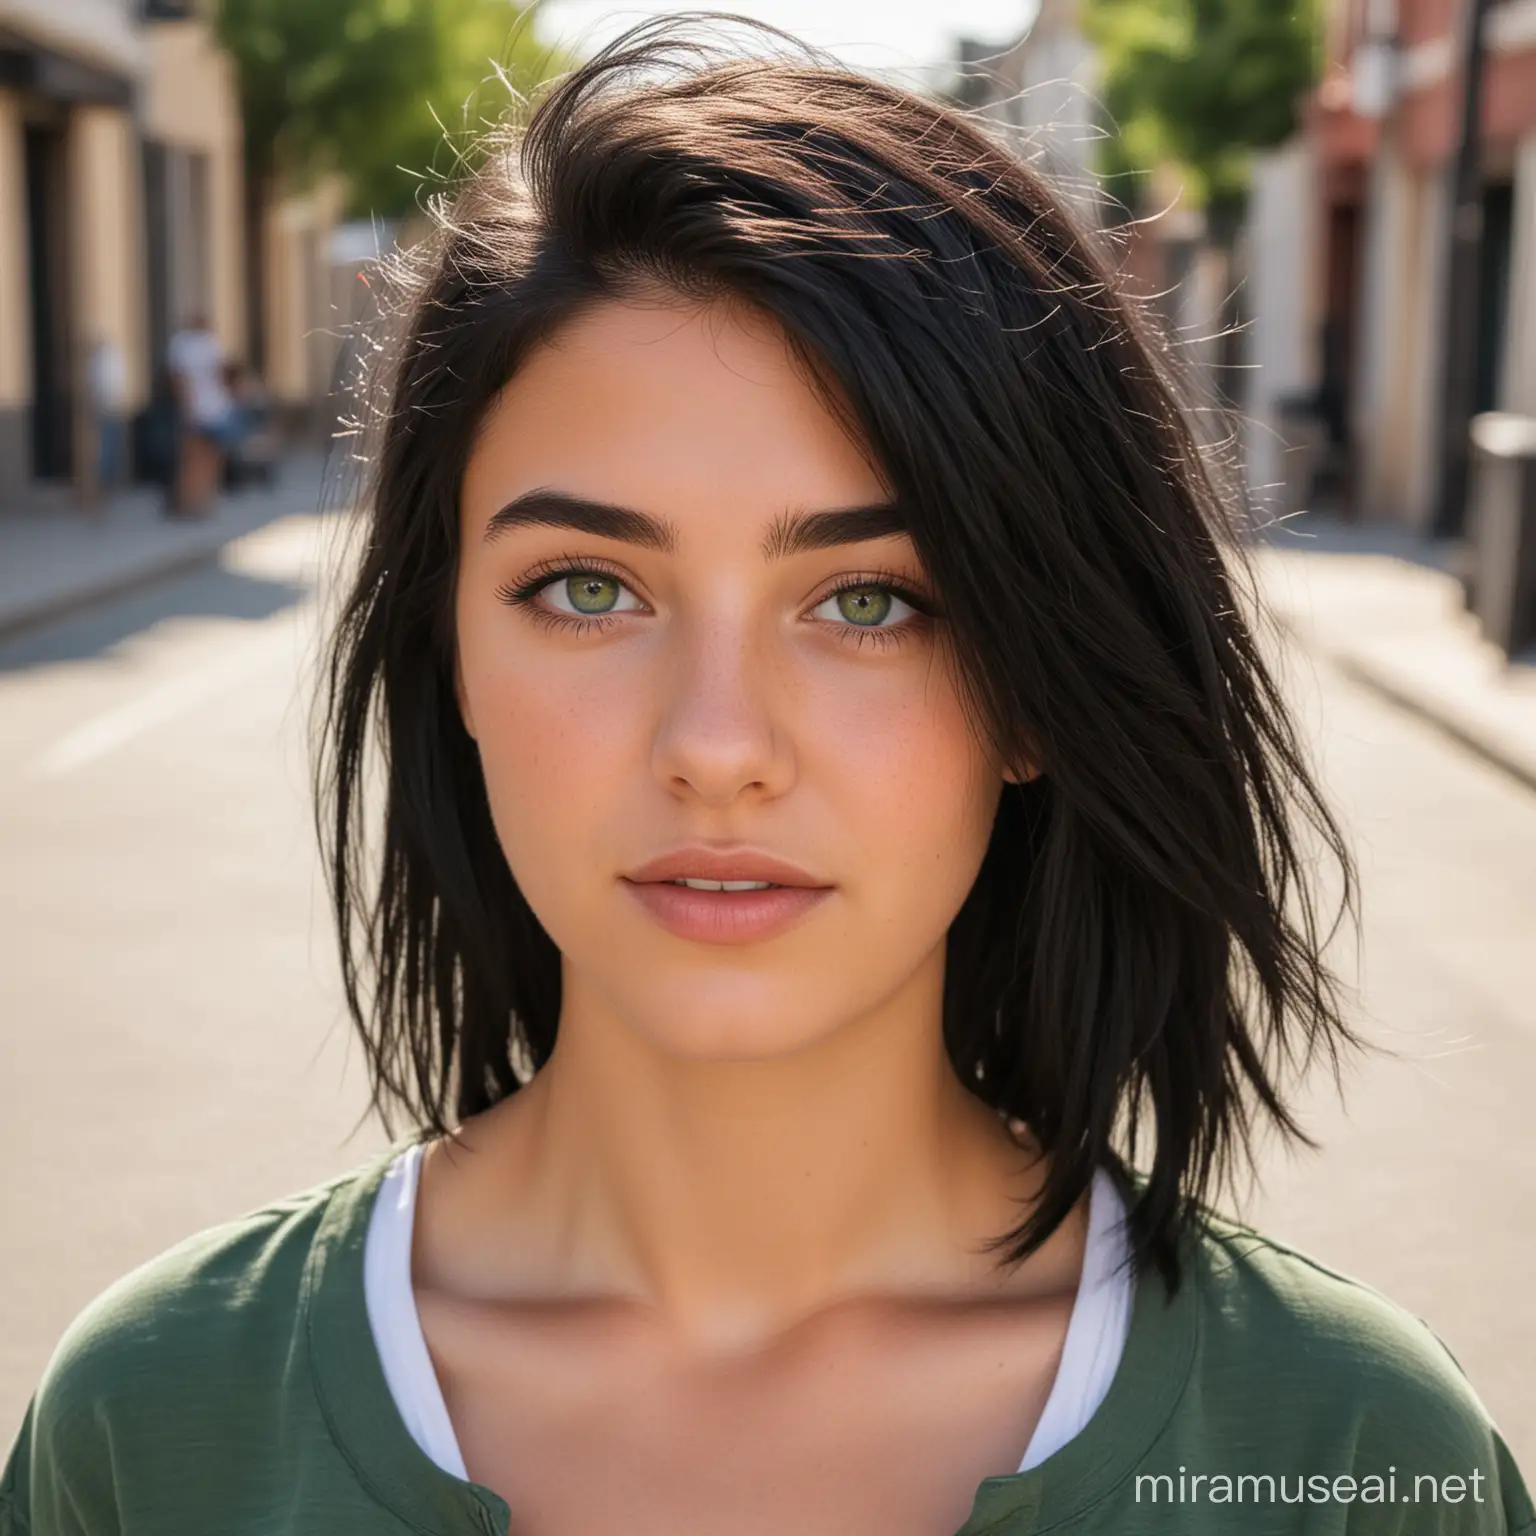 Young Woman with Green Eyes and Black Hair Enjoying Summer Stroll